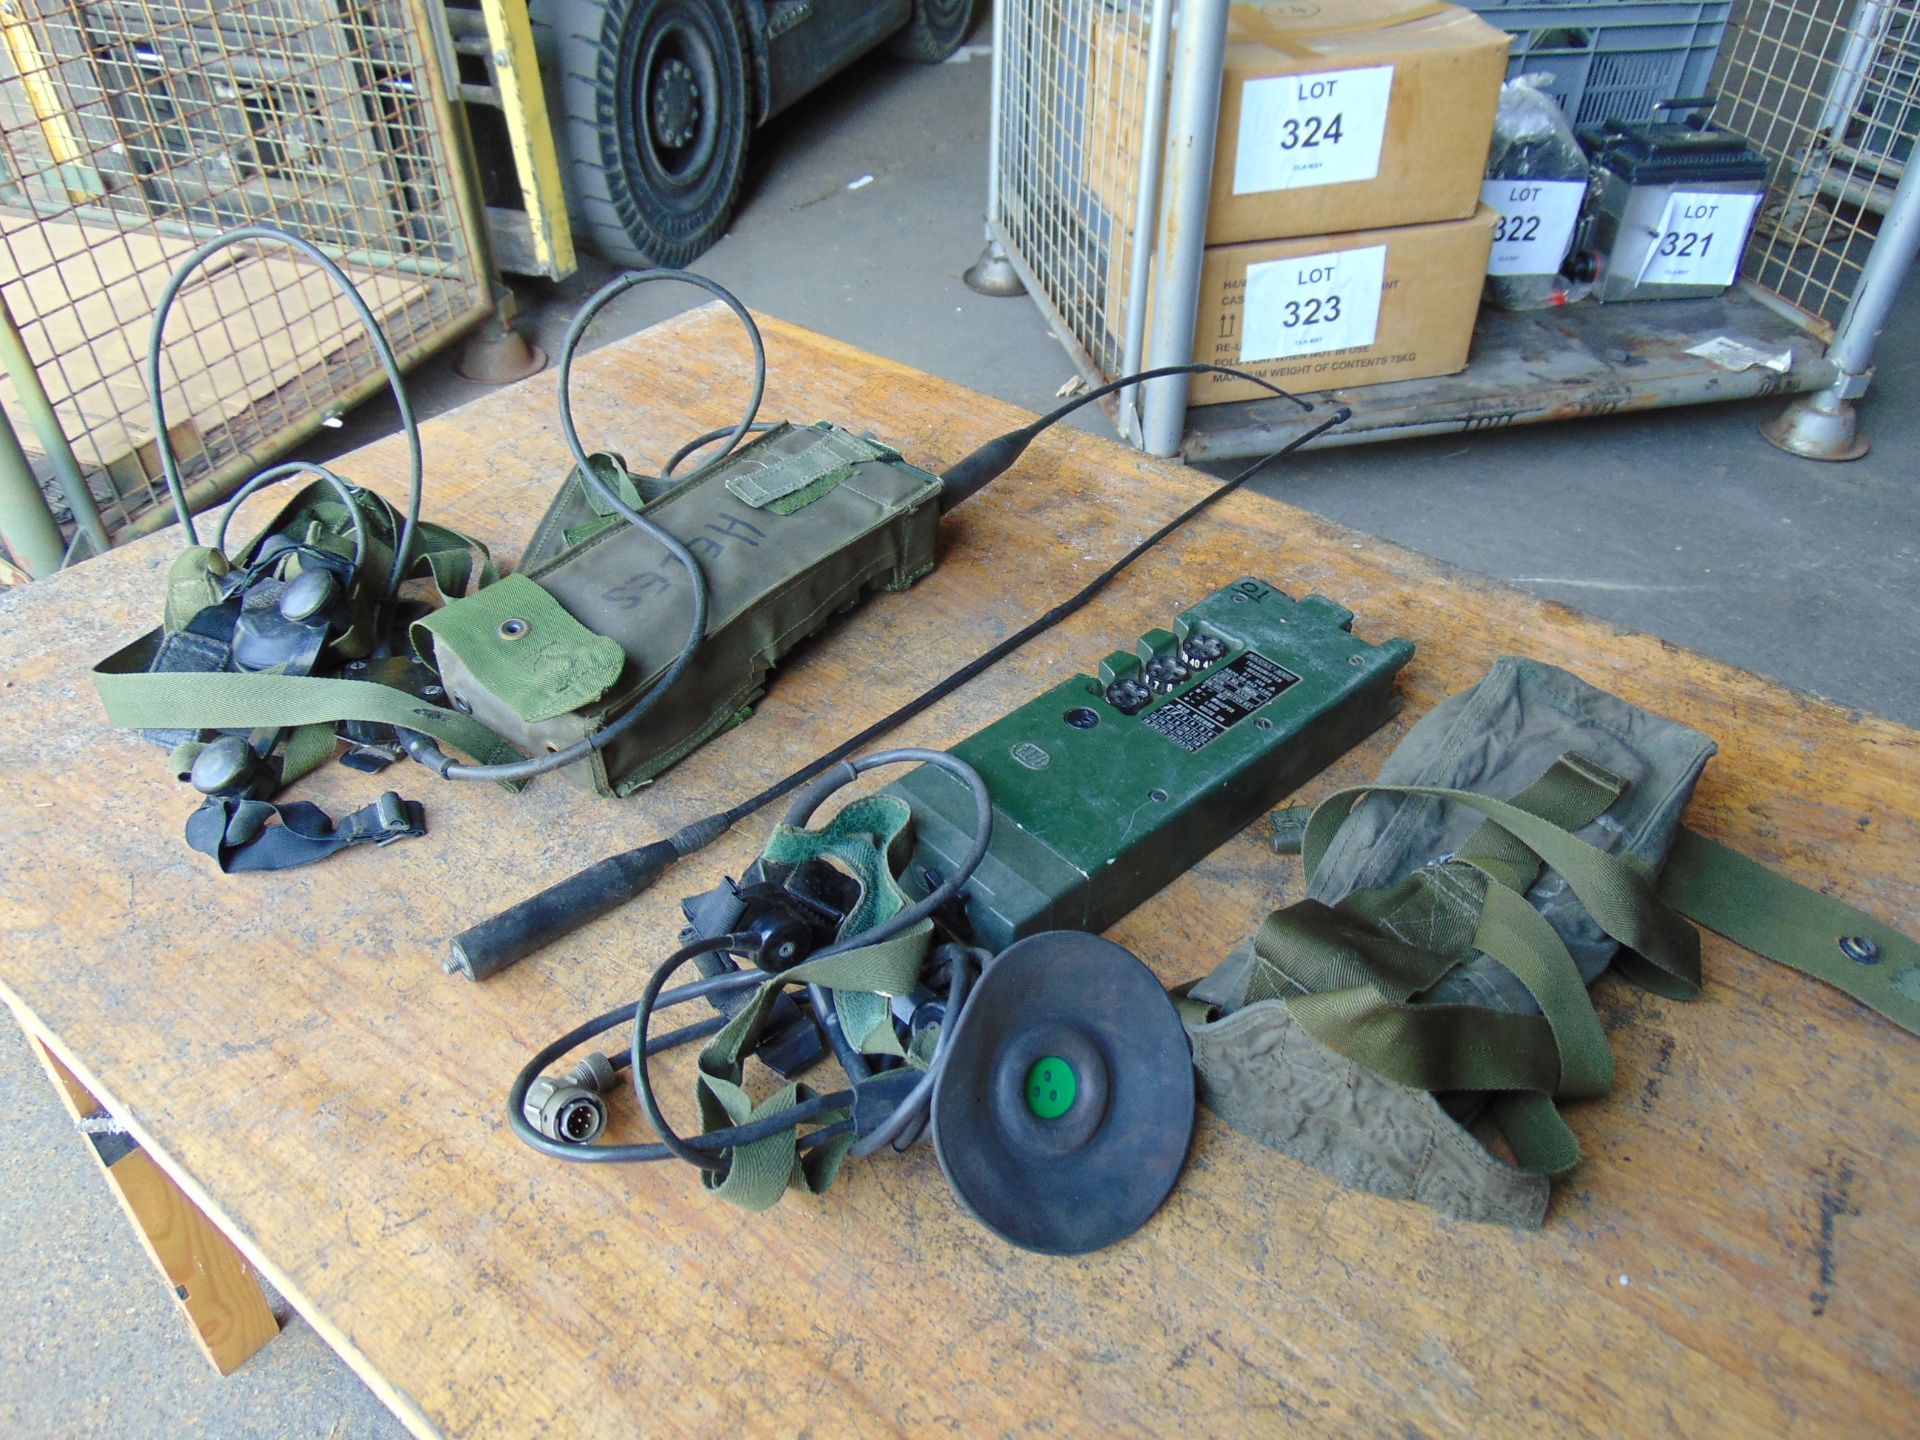 2 x RT 349 British Army Transmitter / Receiver c/w Pouch, Headset, Antenna and Battery Cassette - Image 4 of 5